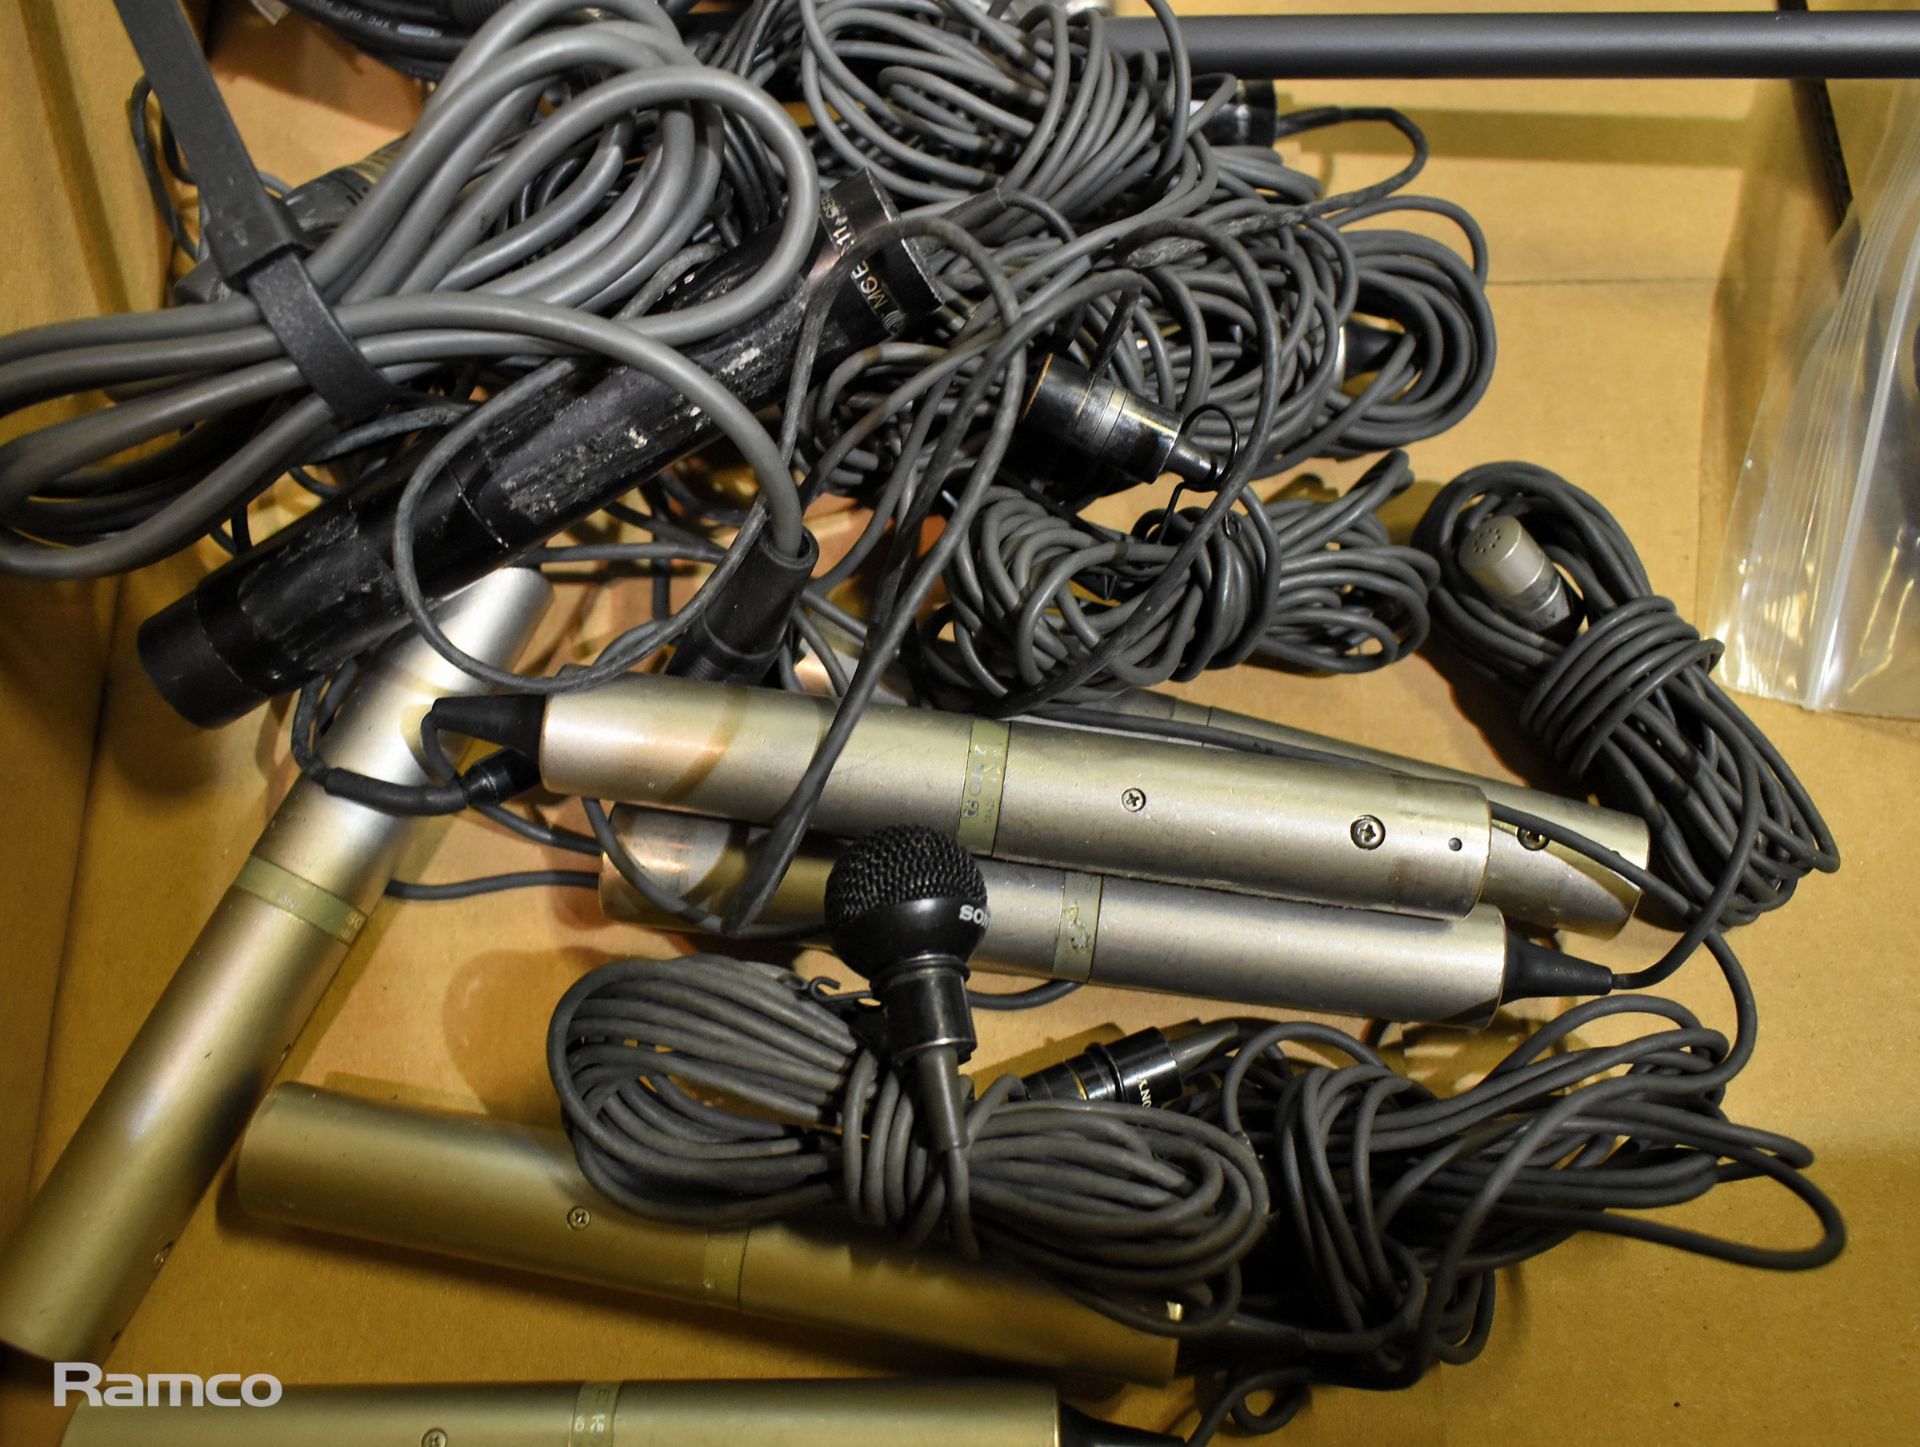 6x microphones with cables - includes Sony ECM-S959C & Sony ECM-50PBW - Image 4 of 6